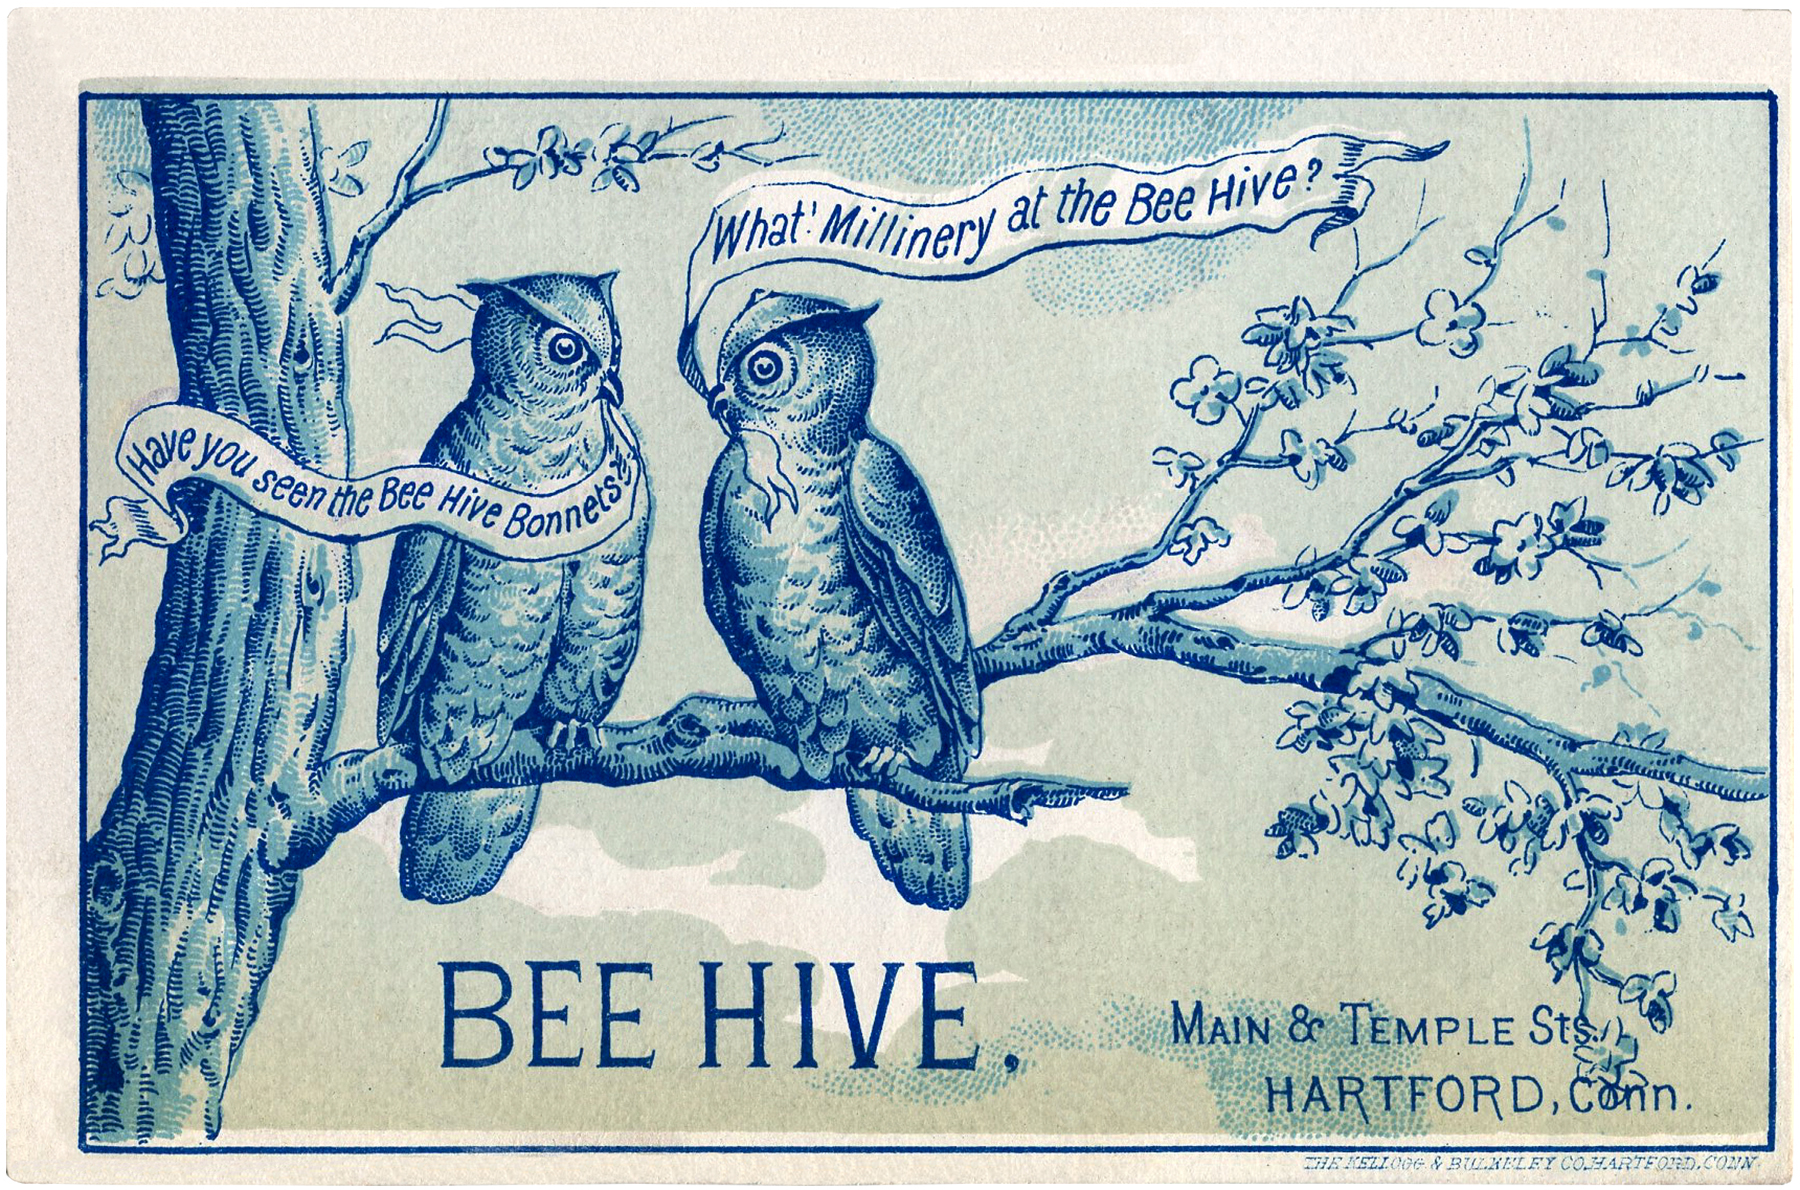 Quirky Vintage Owls Image! - The Graphics Fairy